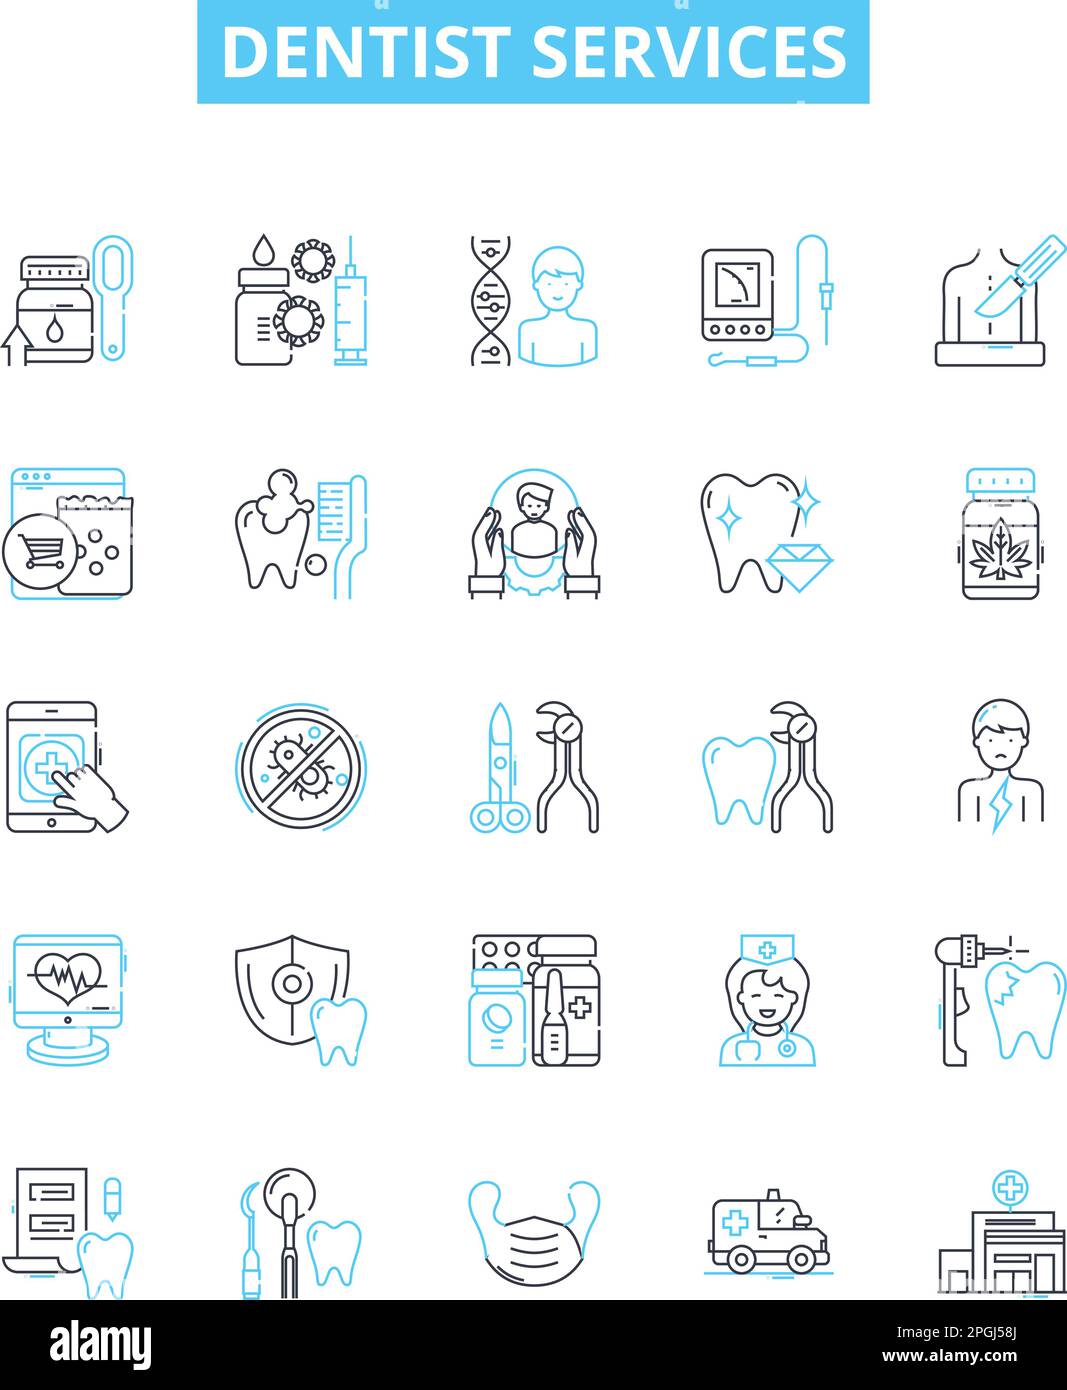 Dentist services vector line icons set. Dentist, Services, Teeth, Cleaning, Fillings, Extractions, Orthodontics illustration outline concept symbols Stock Vector